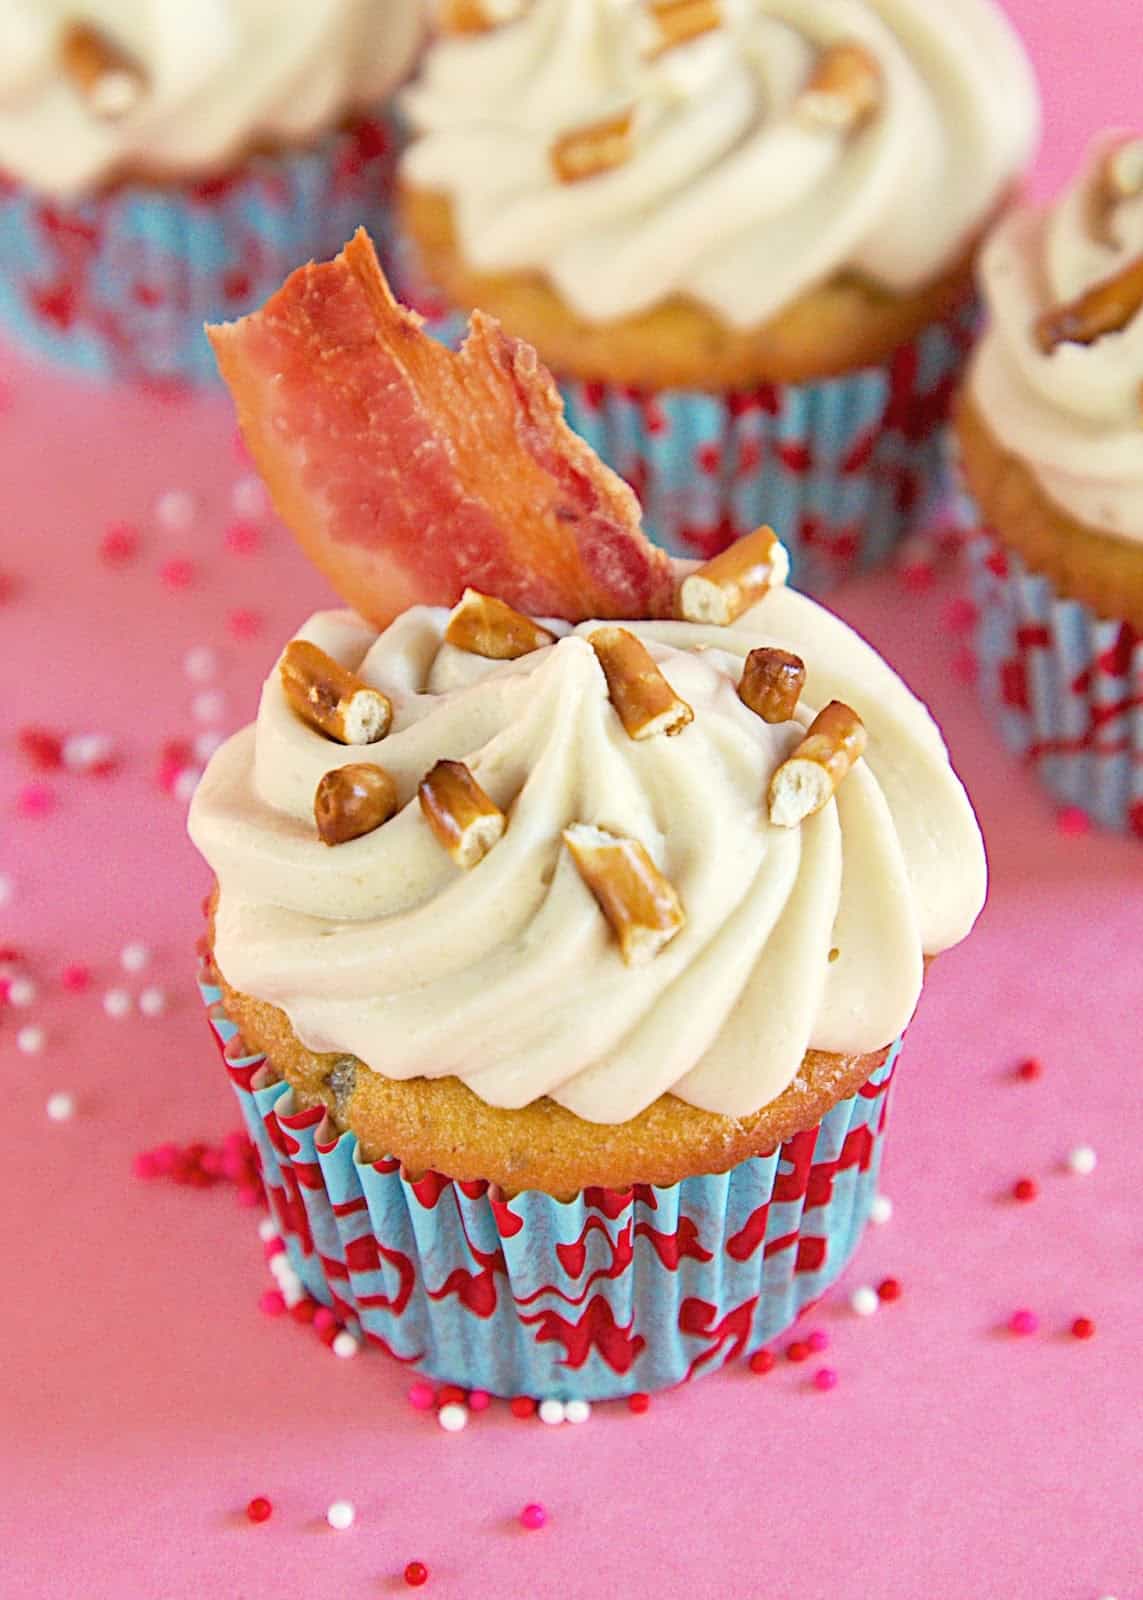 Disney's Piggylicious Bacon Cupcakes - cupcakes baked with bacon fat and packed full of bacon. Topped with a maple cream cheese frosting! OMG delicious! 